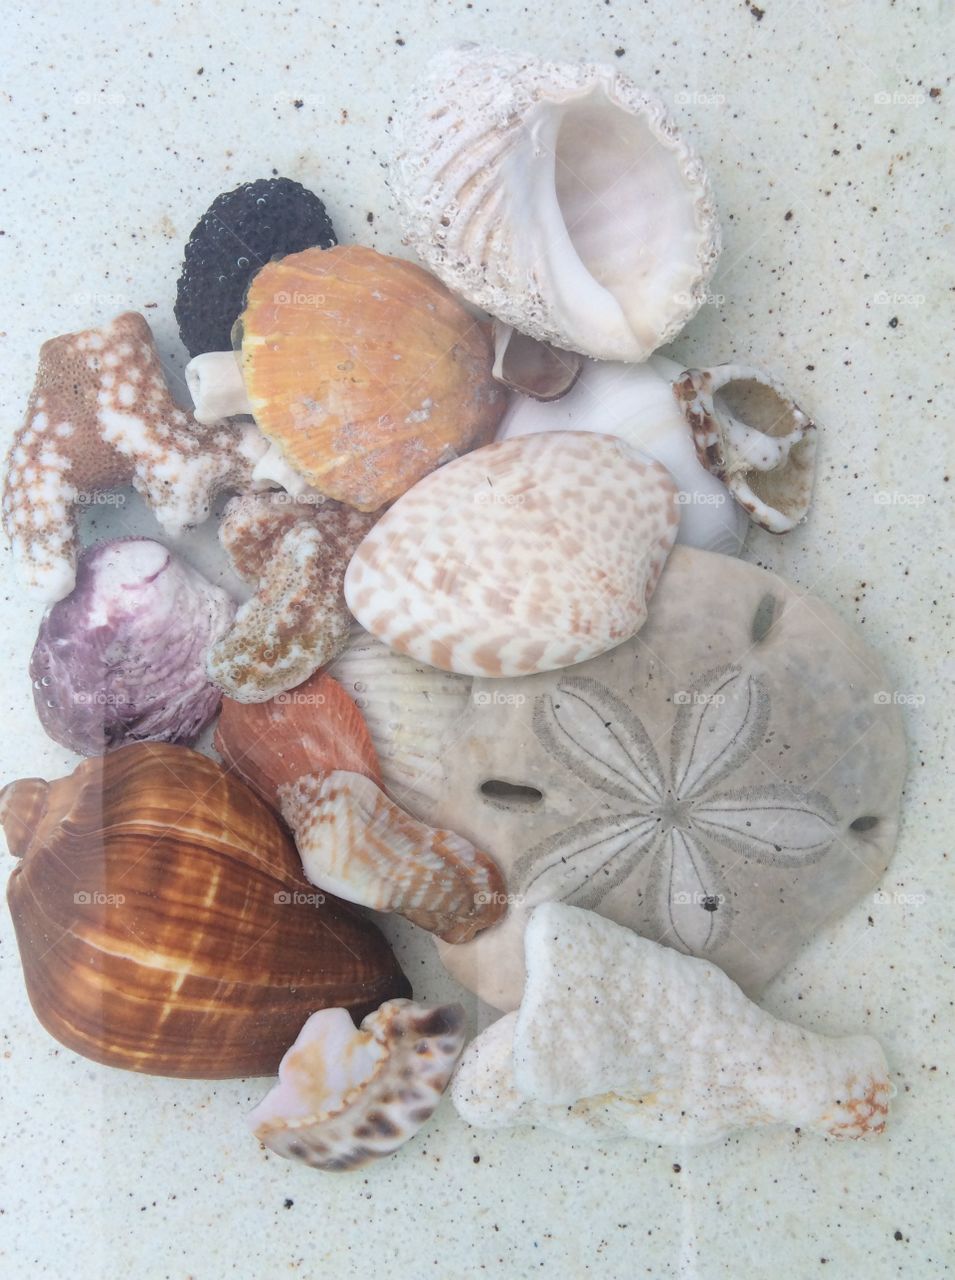 Shells in the water